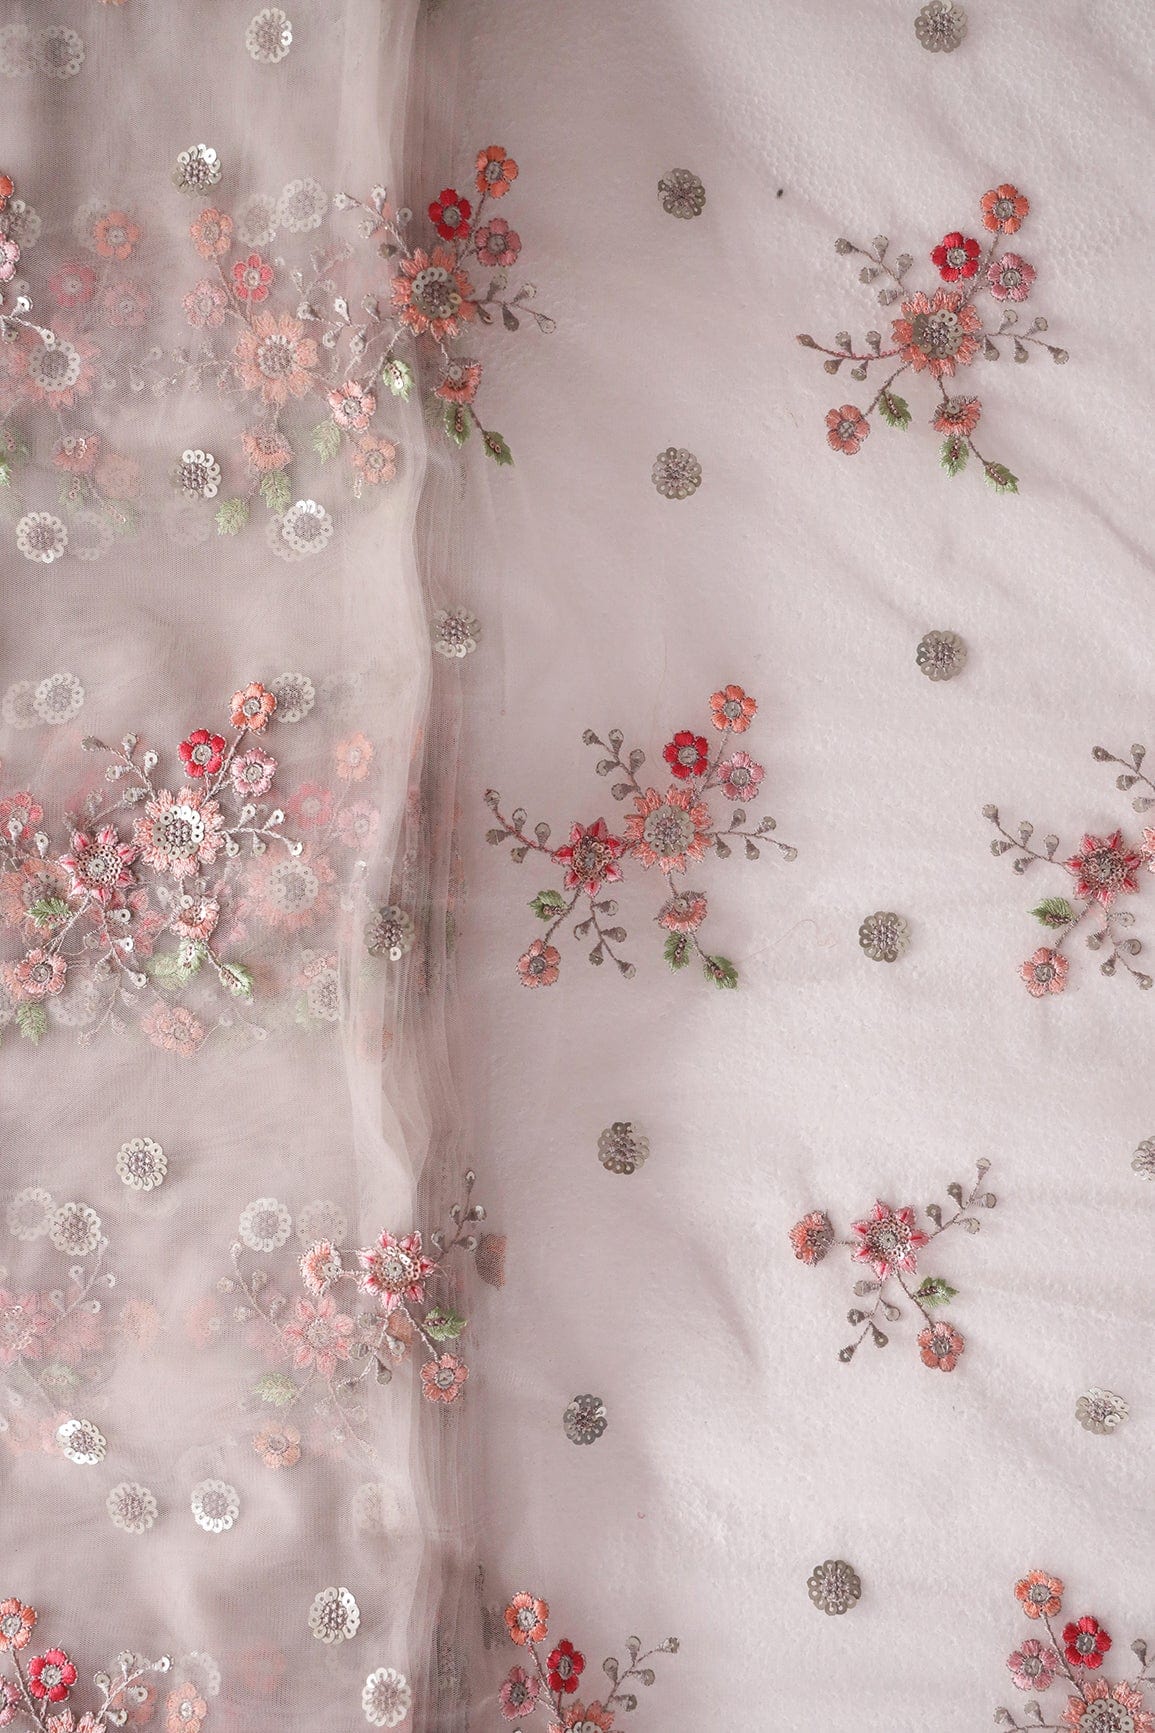 doeraa Embroidery Fabrics Multi Thread With Sequins Floral Butta Embroidery On Light Grey Soft Net Fabric